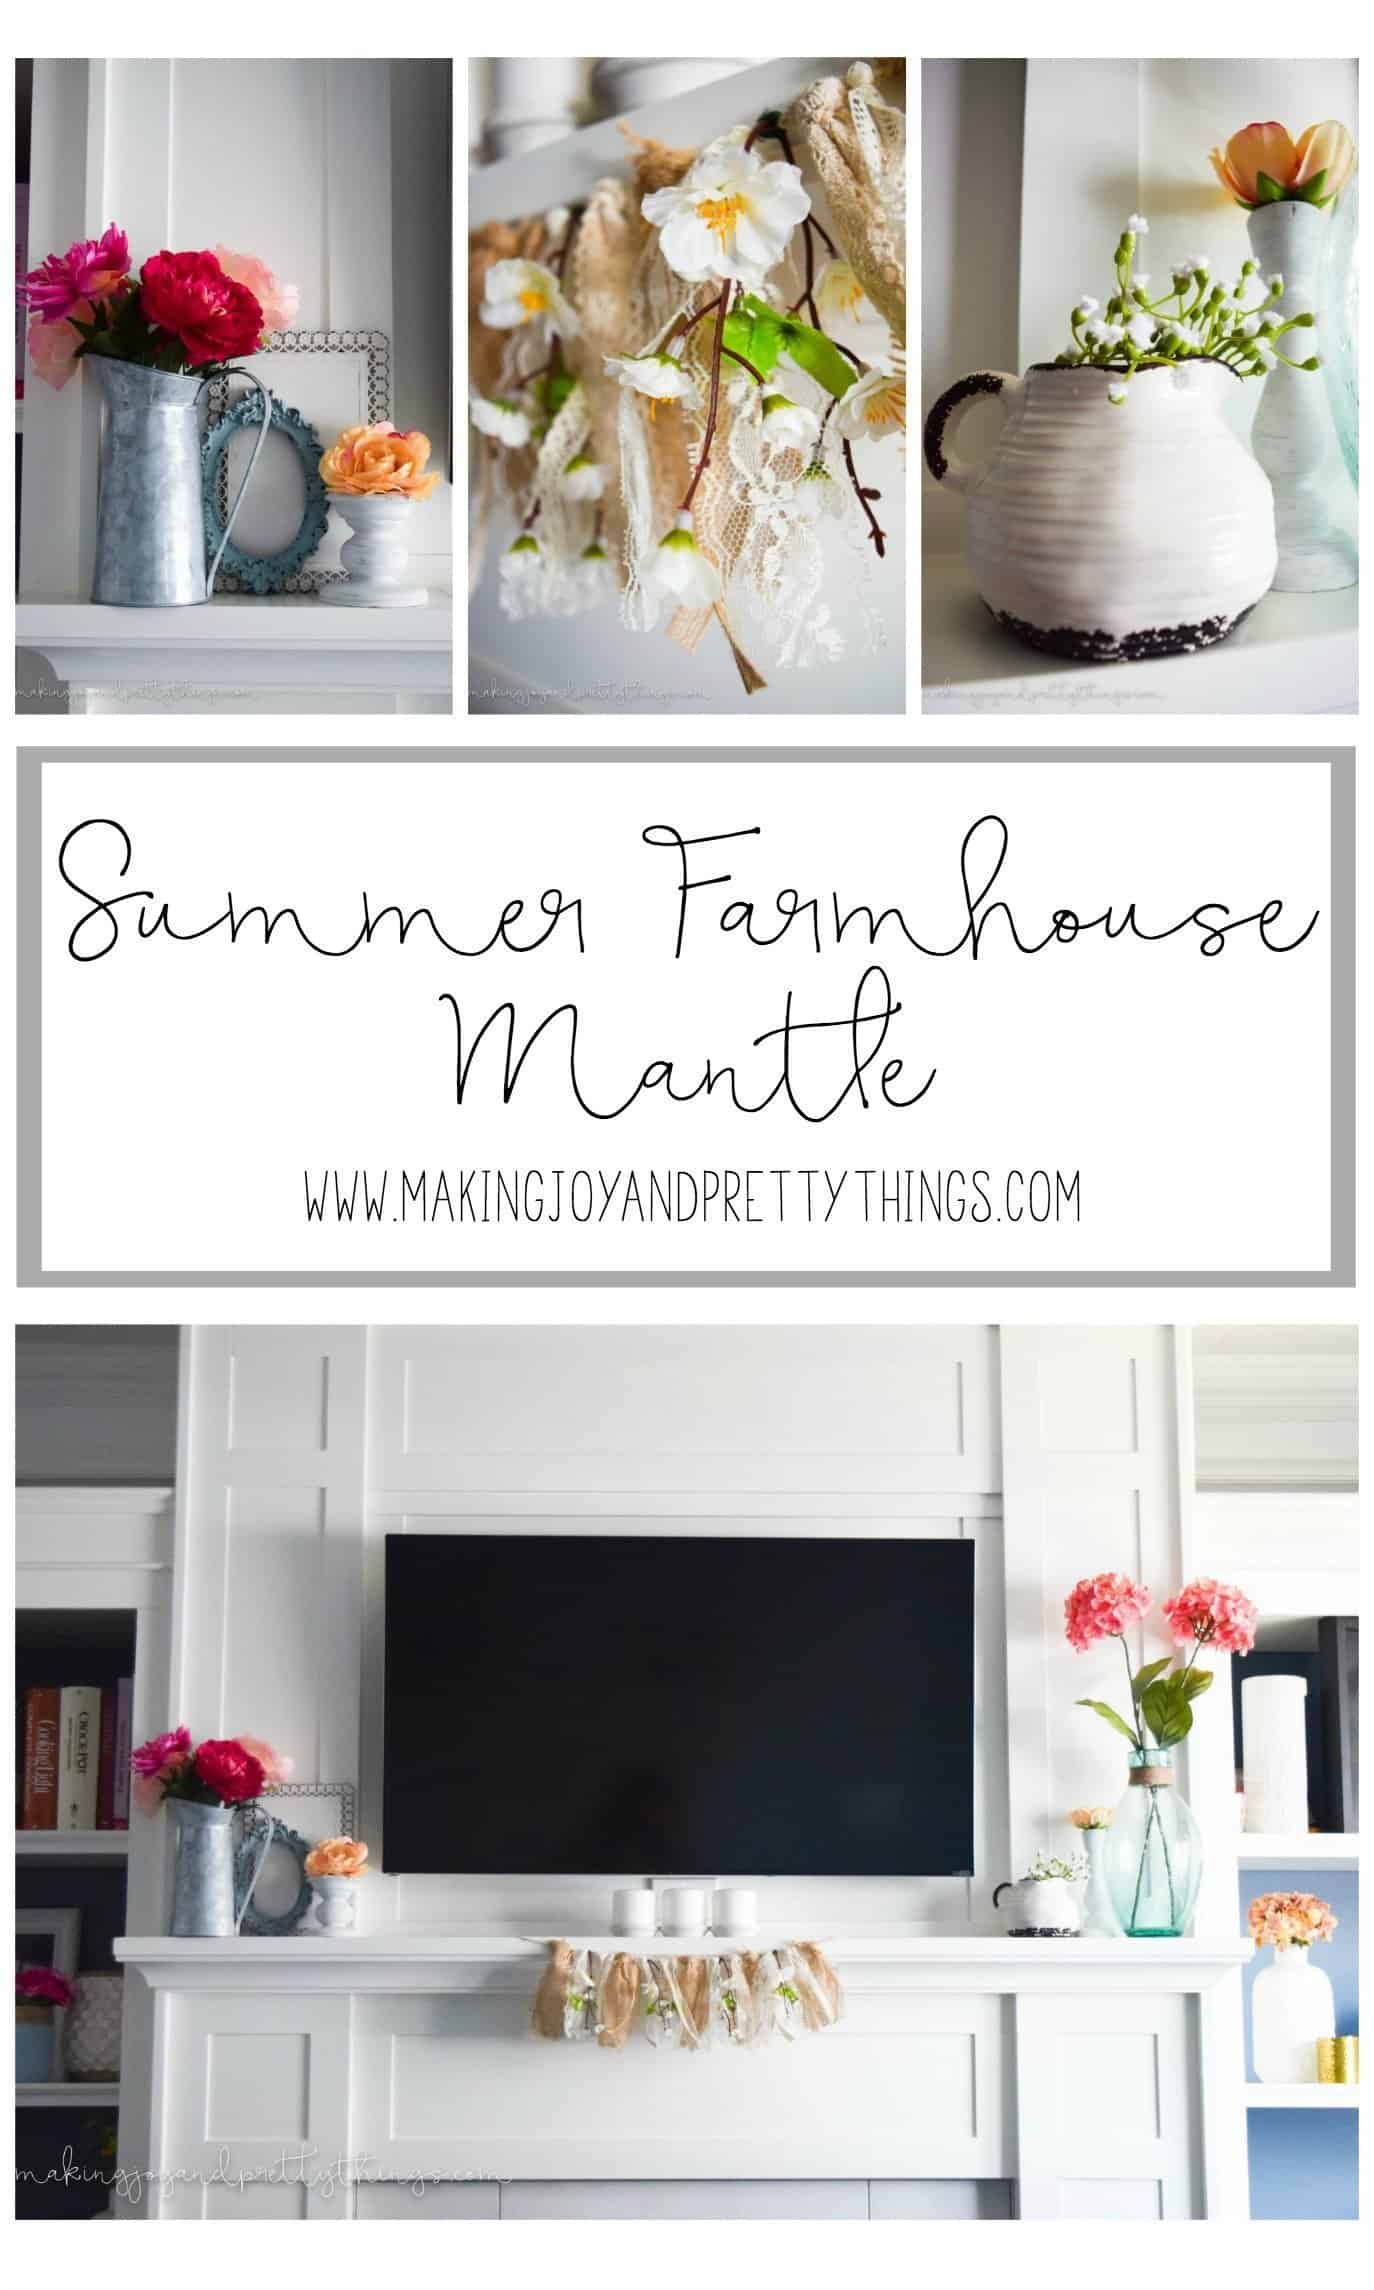 Need some farmhouse inspiration for your mantle? Come check out this amazing and easy DIY farmhouse mantle. Tons of farmhouse inspiration and farmhouse decor with touches of summer color.